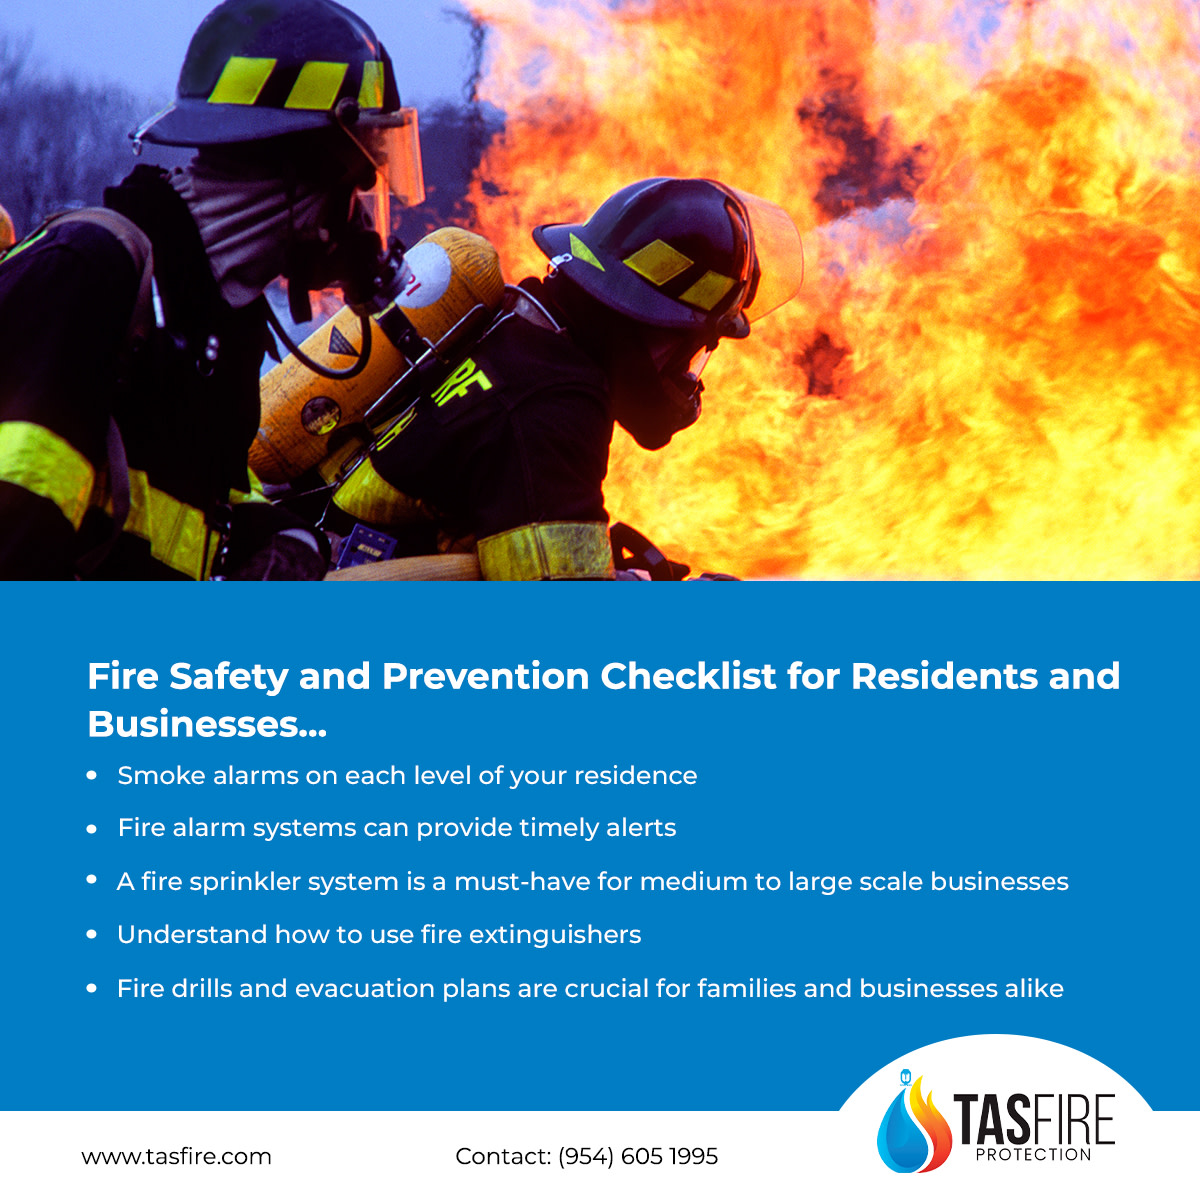 TAS Fire Protection - Fire Safety and Prevention Checklist for Residents and Businesses…
VIEW TIPS... tasfire.com/fire_safety-pr…

#firealarms #fireprotection #fireservices #fireprotectionservices #weston #hamilton #florida #ontario